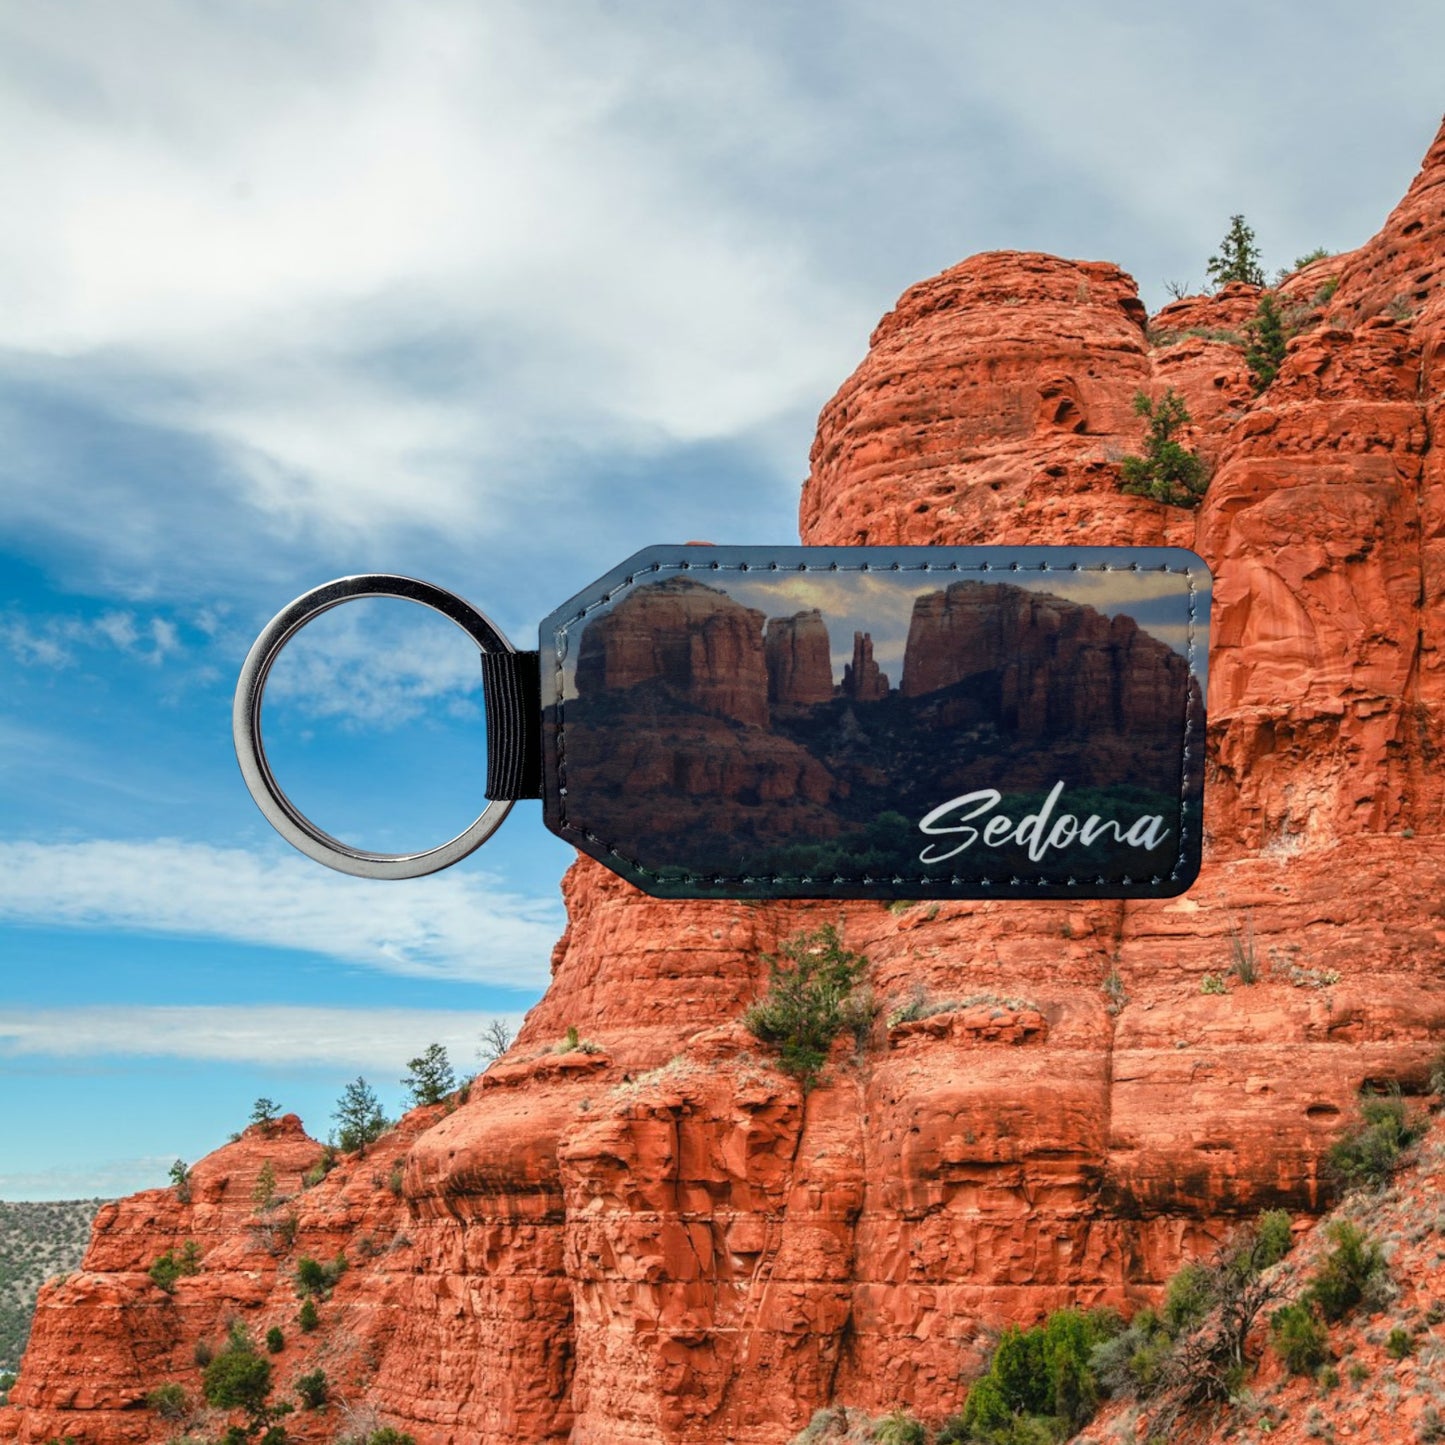 Keychain Close up of Iconic Cathedral Rock in Sedona